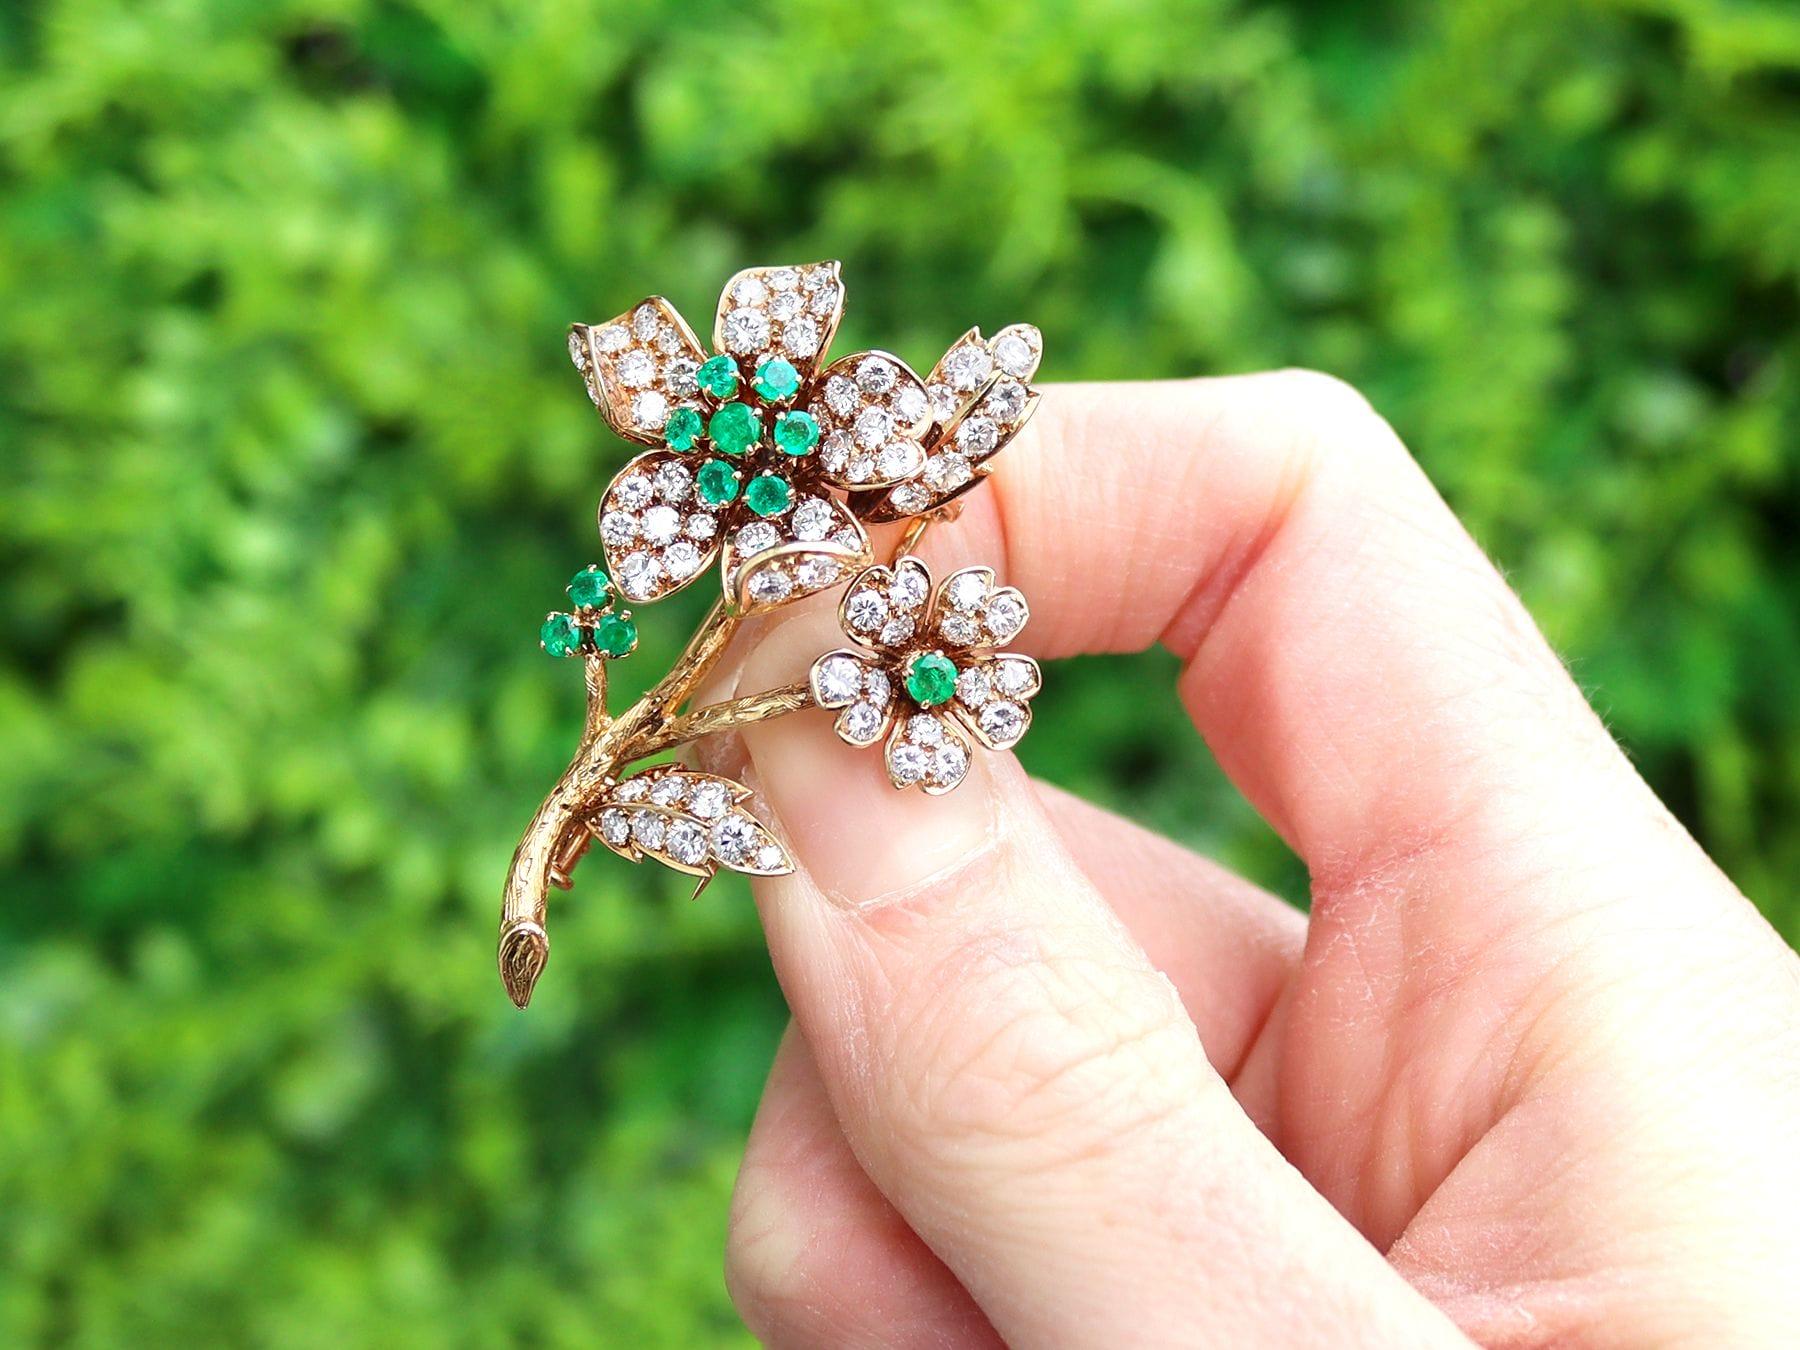 A stunning, fine and impressive vintage French 2.90 Carat diamond and 0.40 Carat emerald, 18k yellow gold flower spray brooch; part of our diverse brooch collection.

This stunning vintage emerald brooch has been crafted in 18k yellow gold.

This